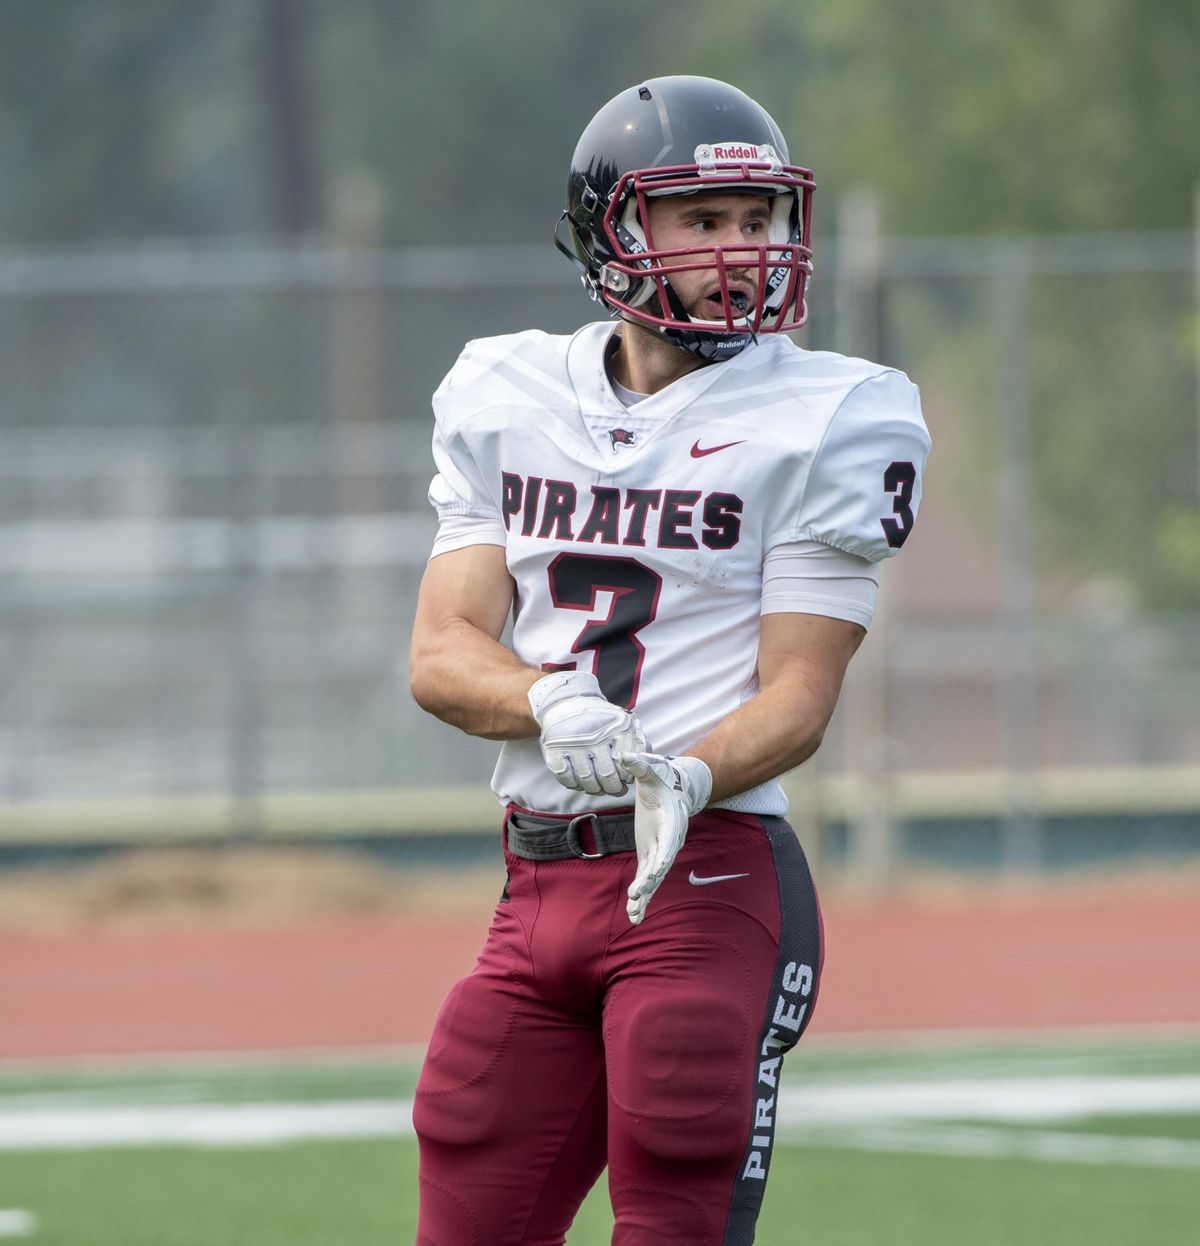 Garrett McKay  of the Whitworth Pirates prepares for the next play  Aug. 25  during a  scrimmage at the Pine Bowl at Whitworth University. (Jesse Tinsley / The Spokesman-Review)